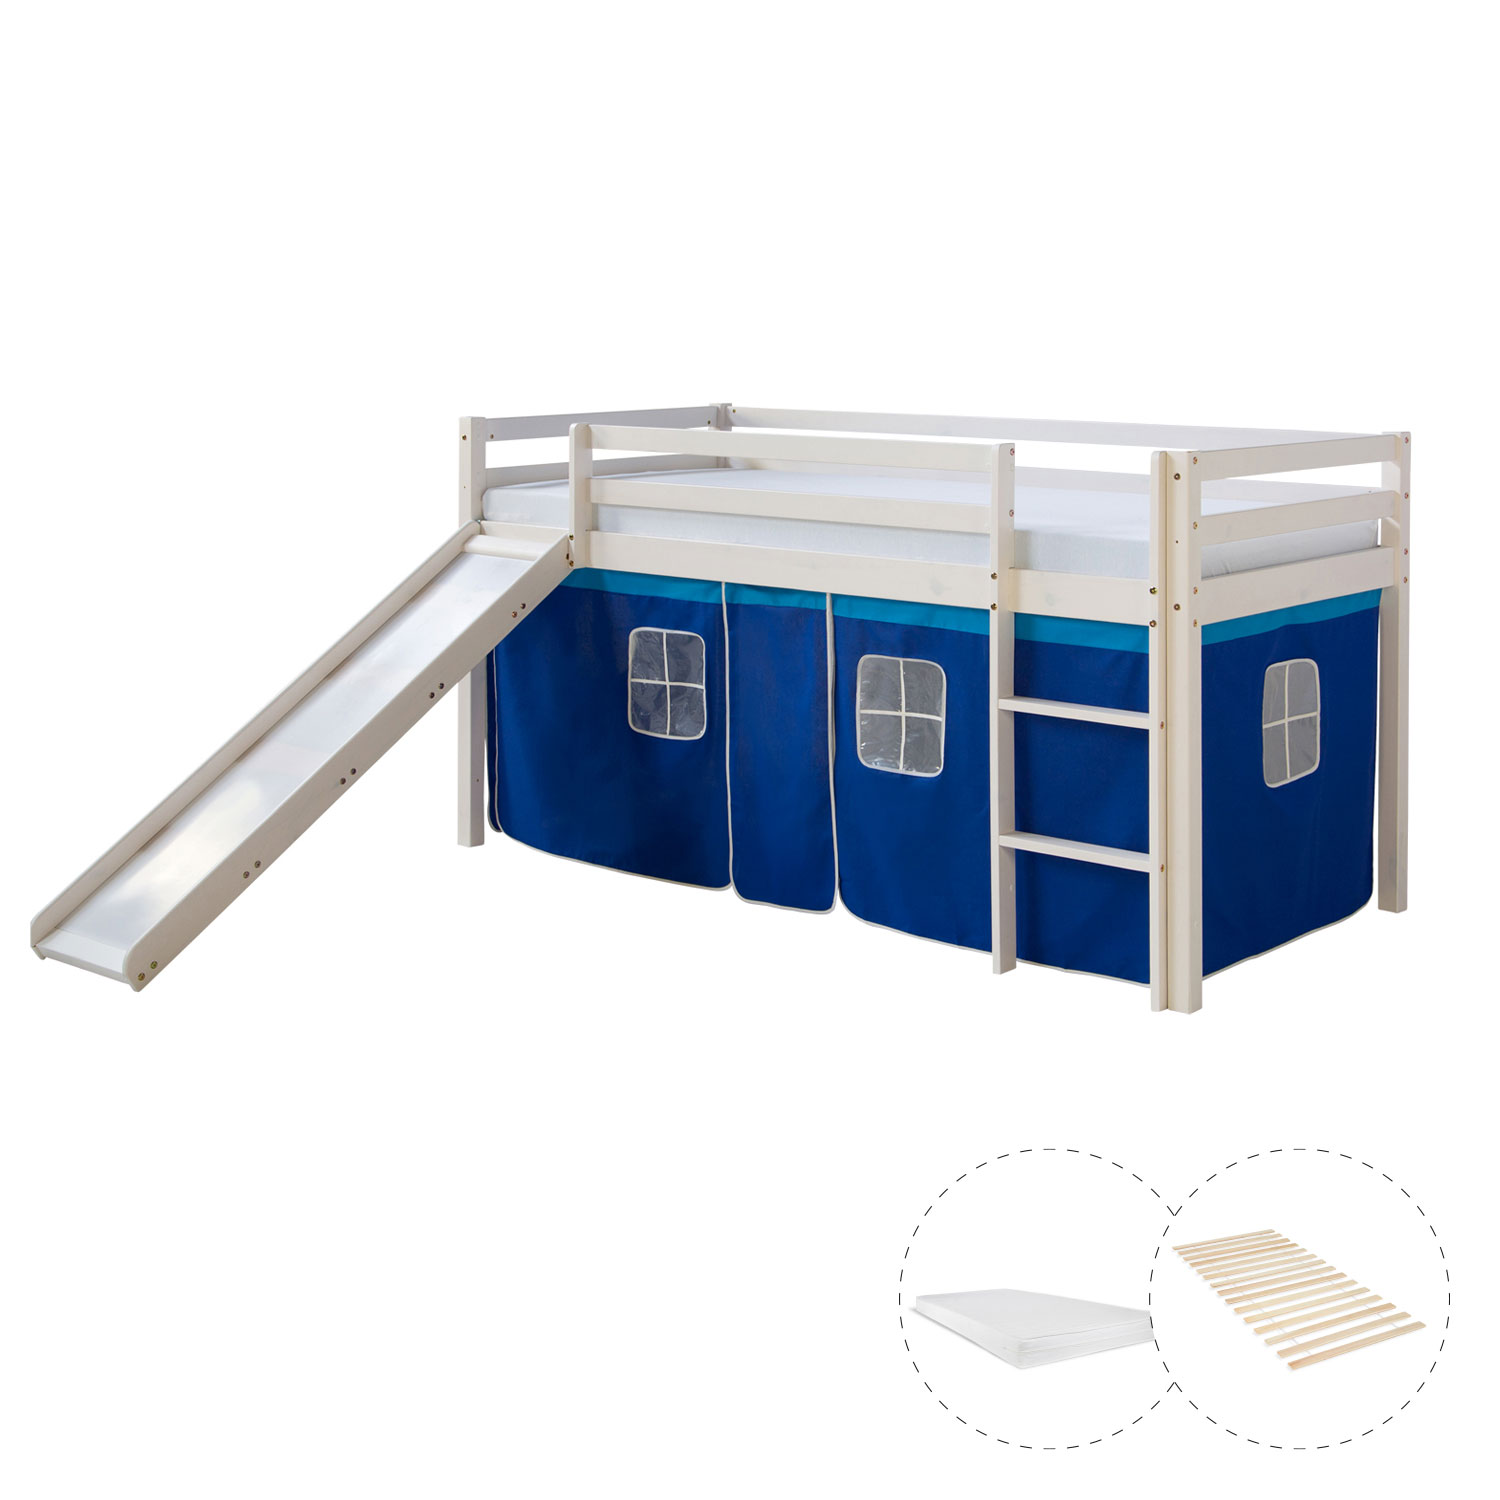 Loftbed 90x200 cm with Slide Mattress Bunk bed Childrens bed Solid Pine Wood Slats Curtain Blue